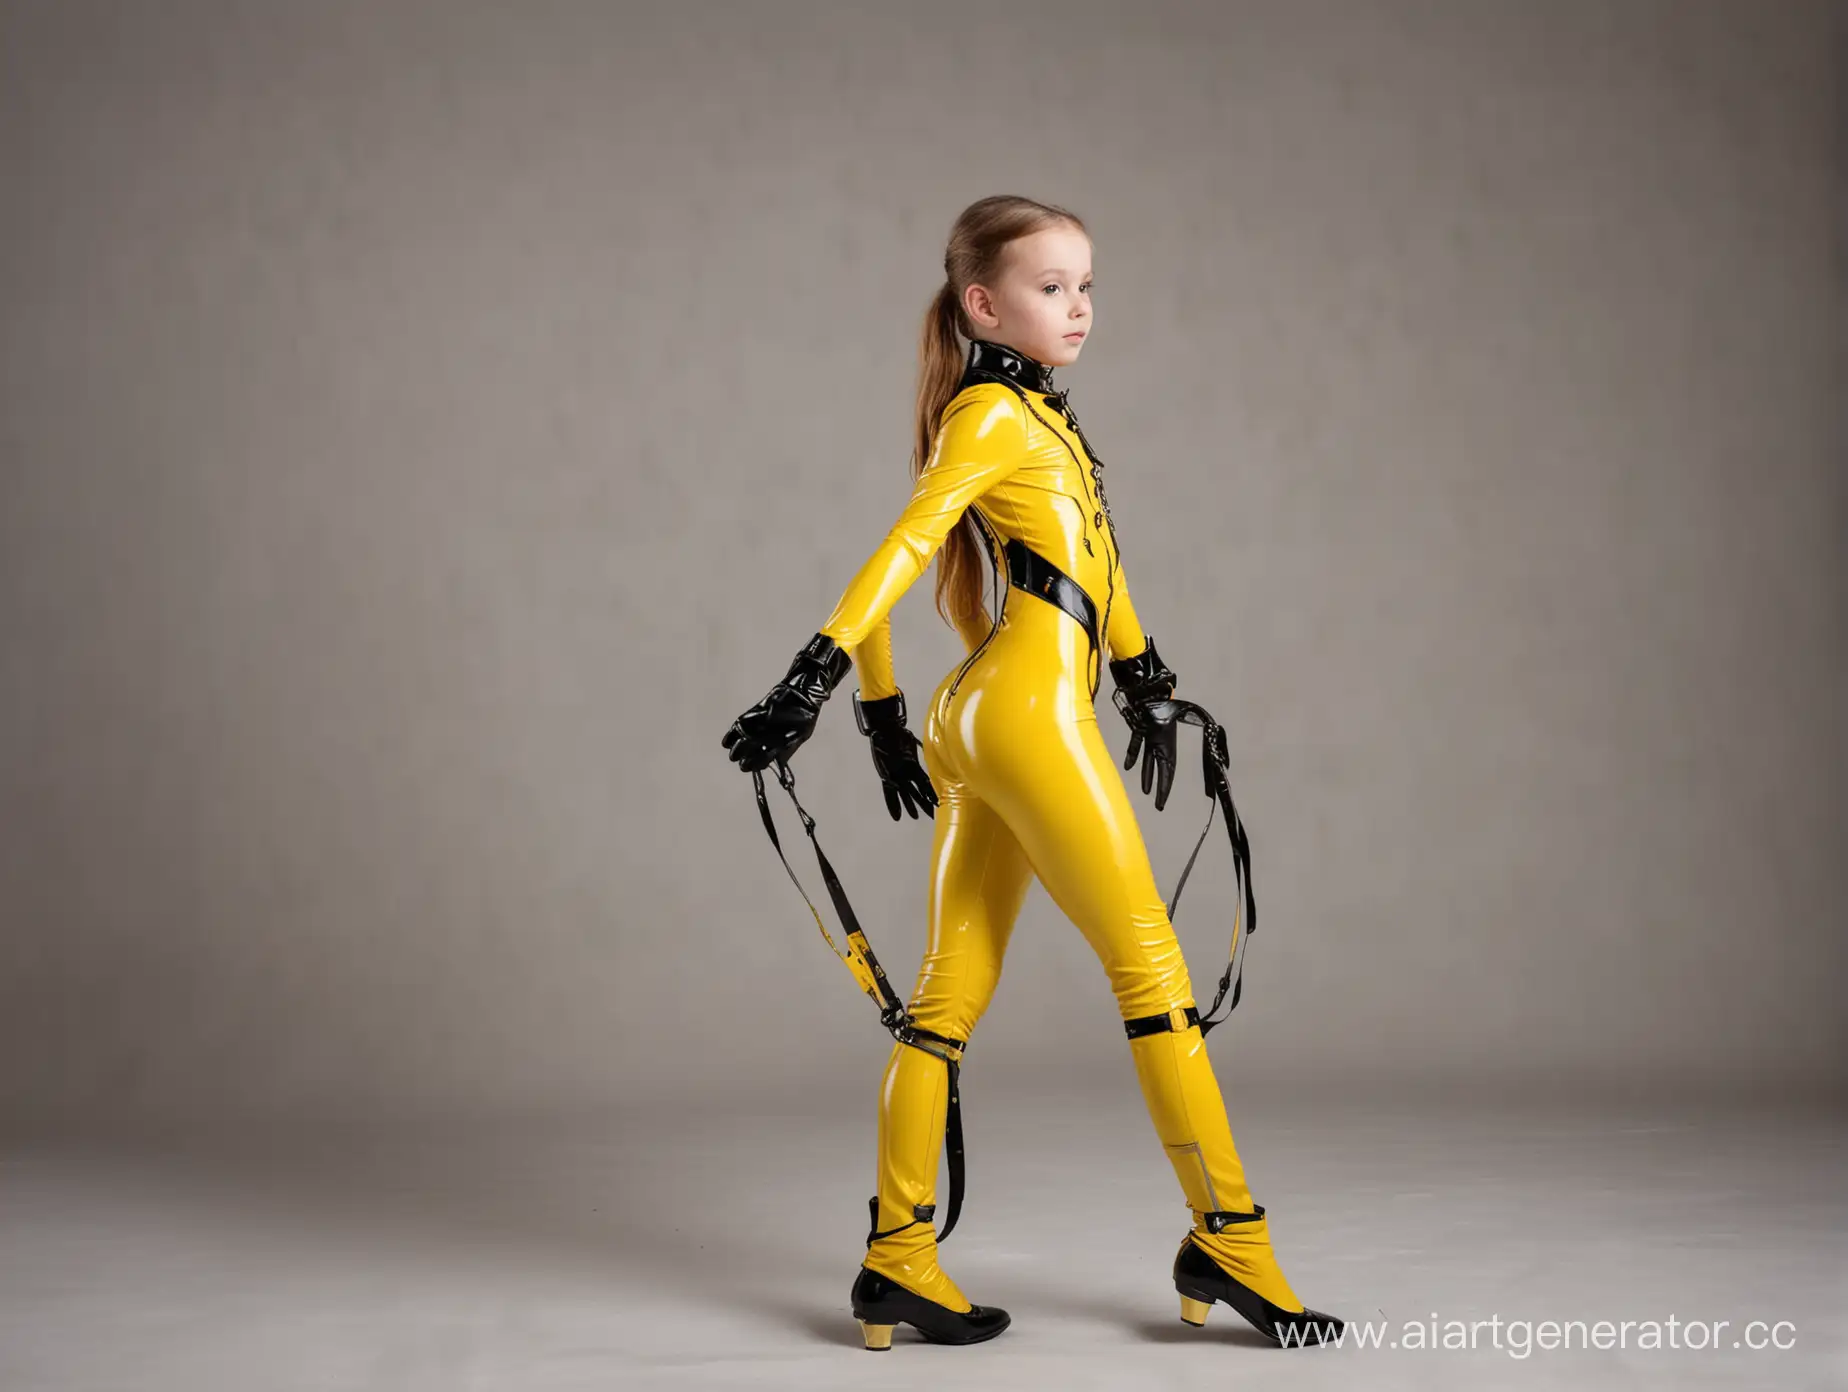 Playful-7YearOld-Girl-in-Striking-Black-Latex-Catsuit-and-Yellow-Harness